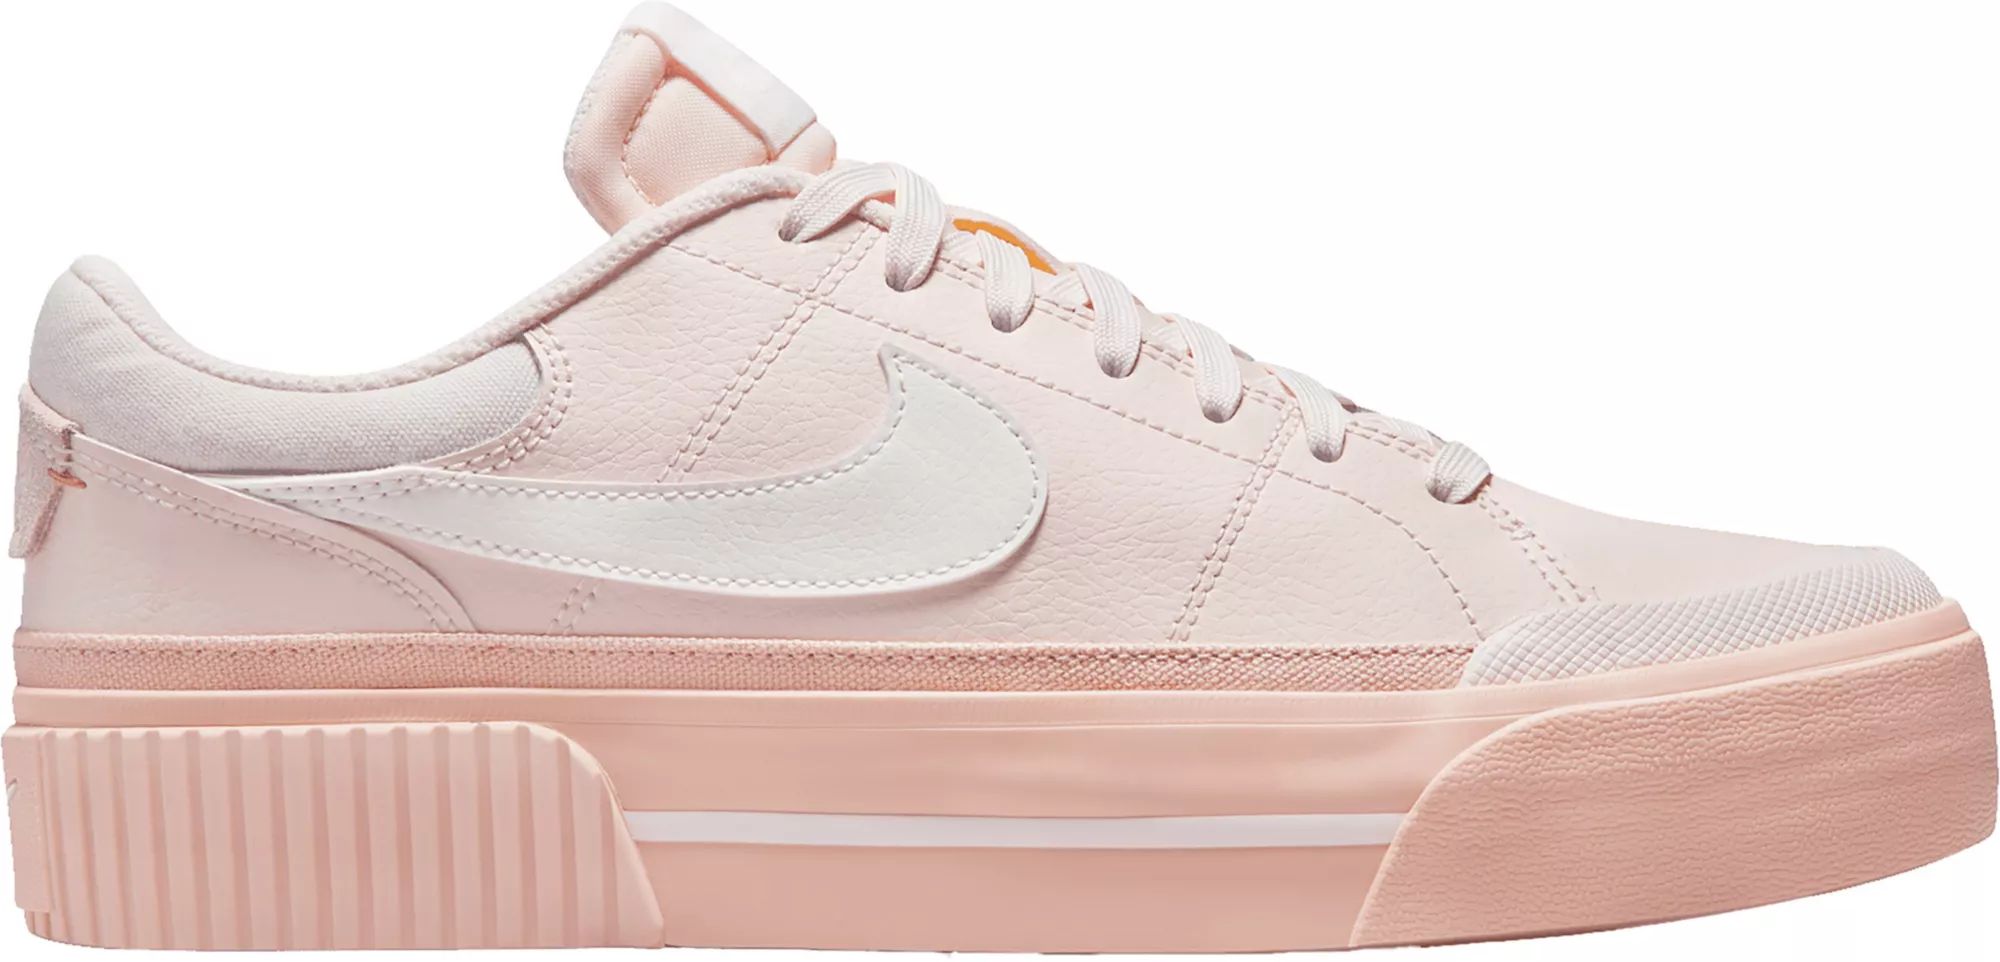 Nike Women's Court Legacy Lift Shoes, Size 6.5, Light Pink | Dick's Sporting Goods